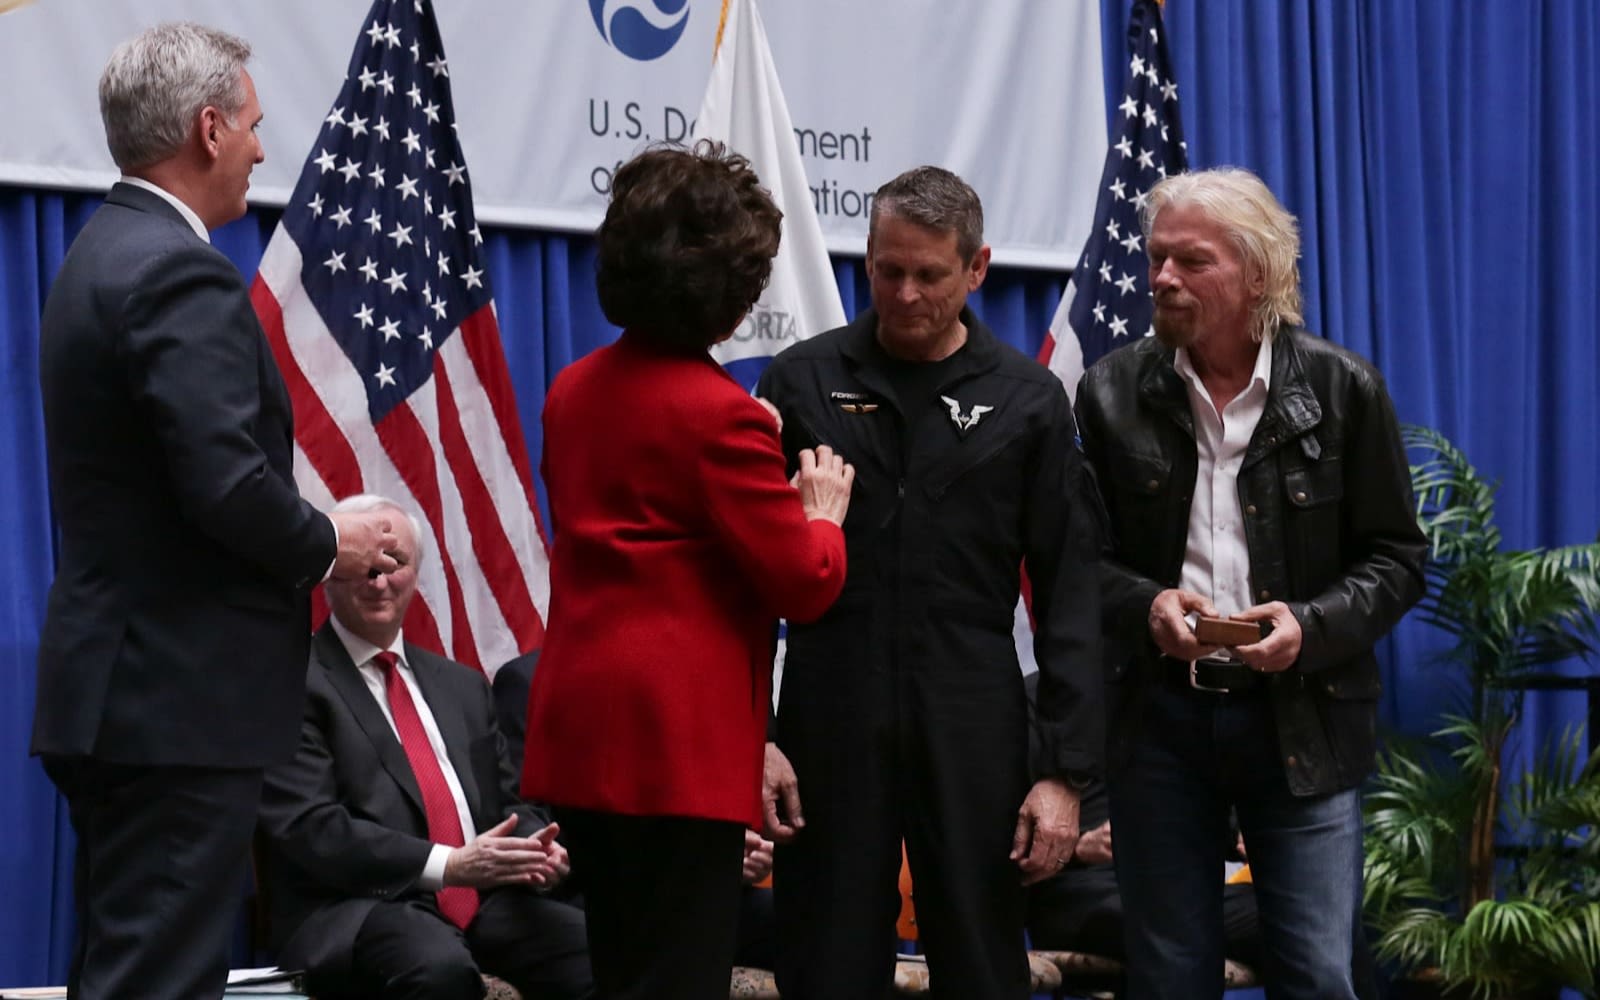 Mark 'Forger' Stucky receives his commercial astronaut wings from Elaine Chao as Richard Branson looks on